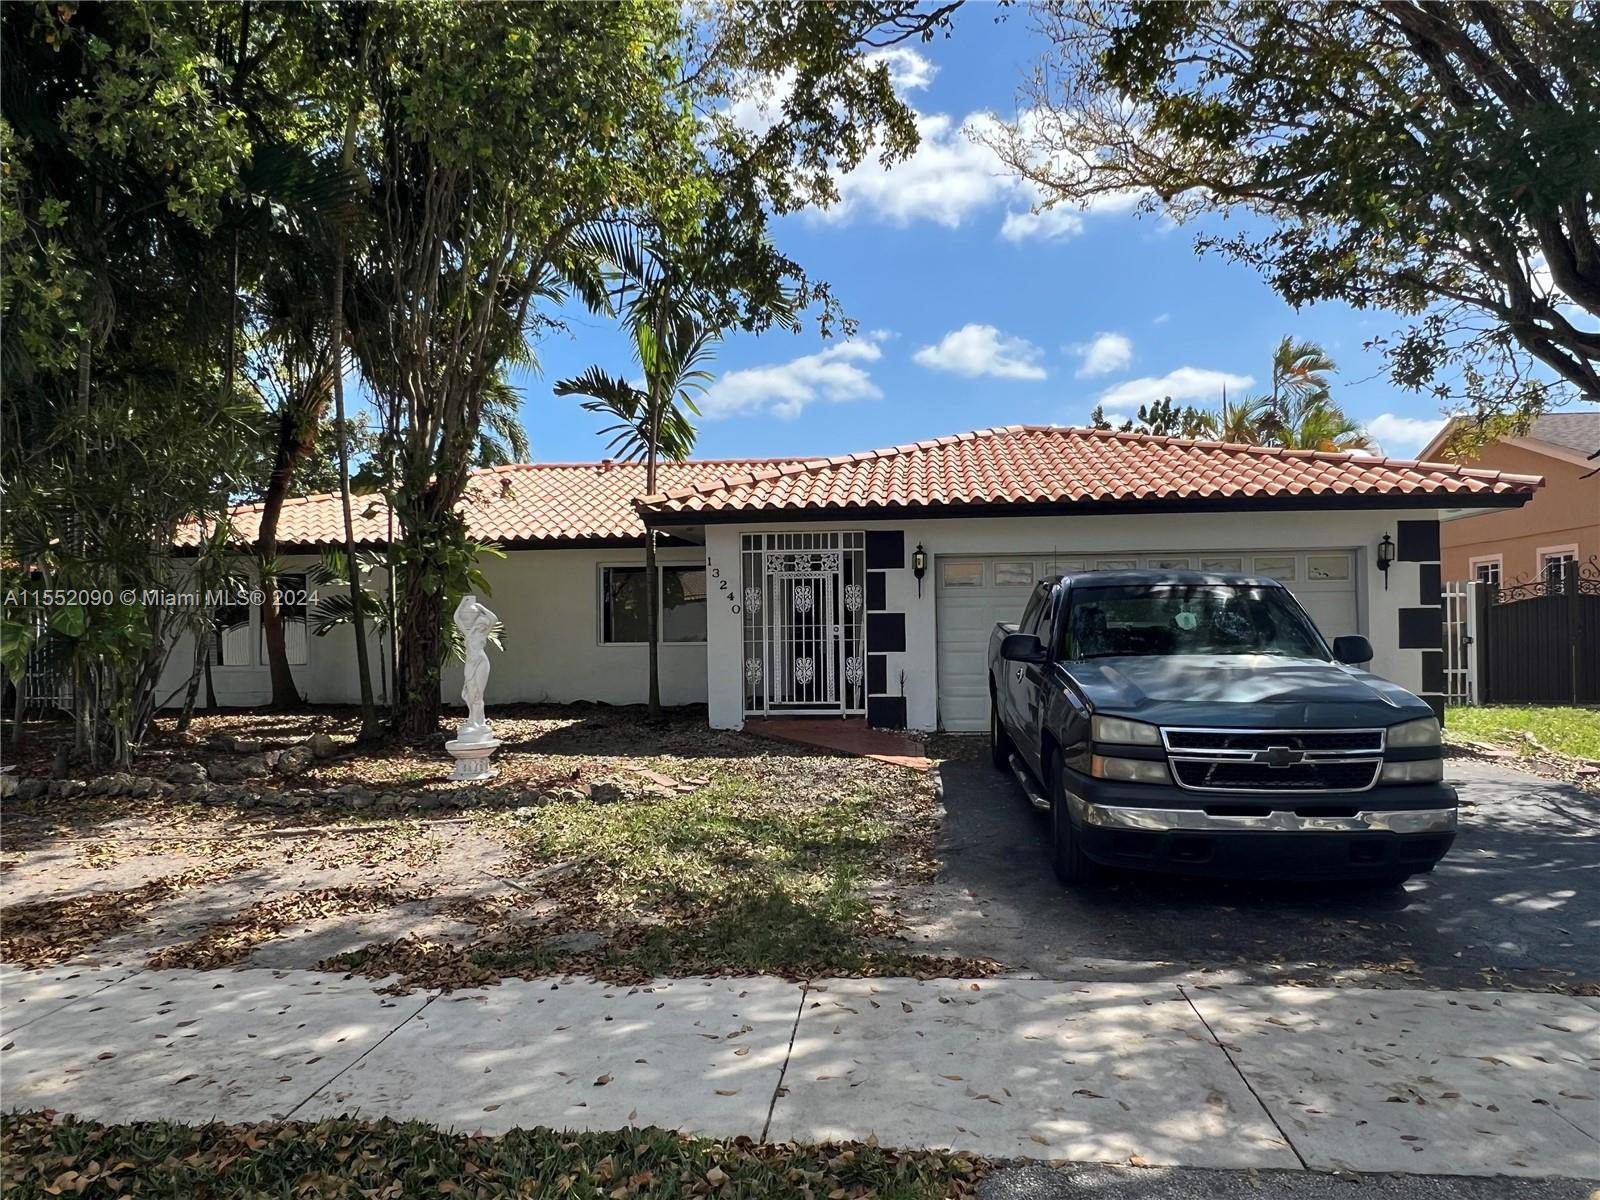 This delightful single family home in a quiet, HOA free neighborhood offers 3 bedrooms and 2 bathrooms within its 2, 512 total s f.